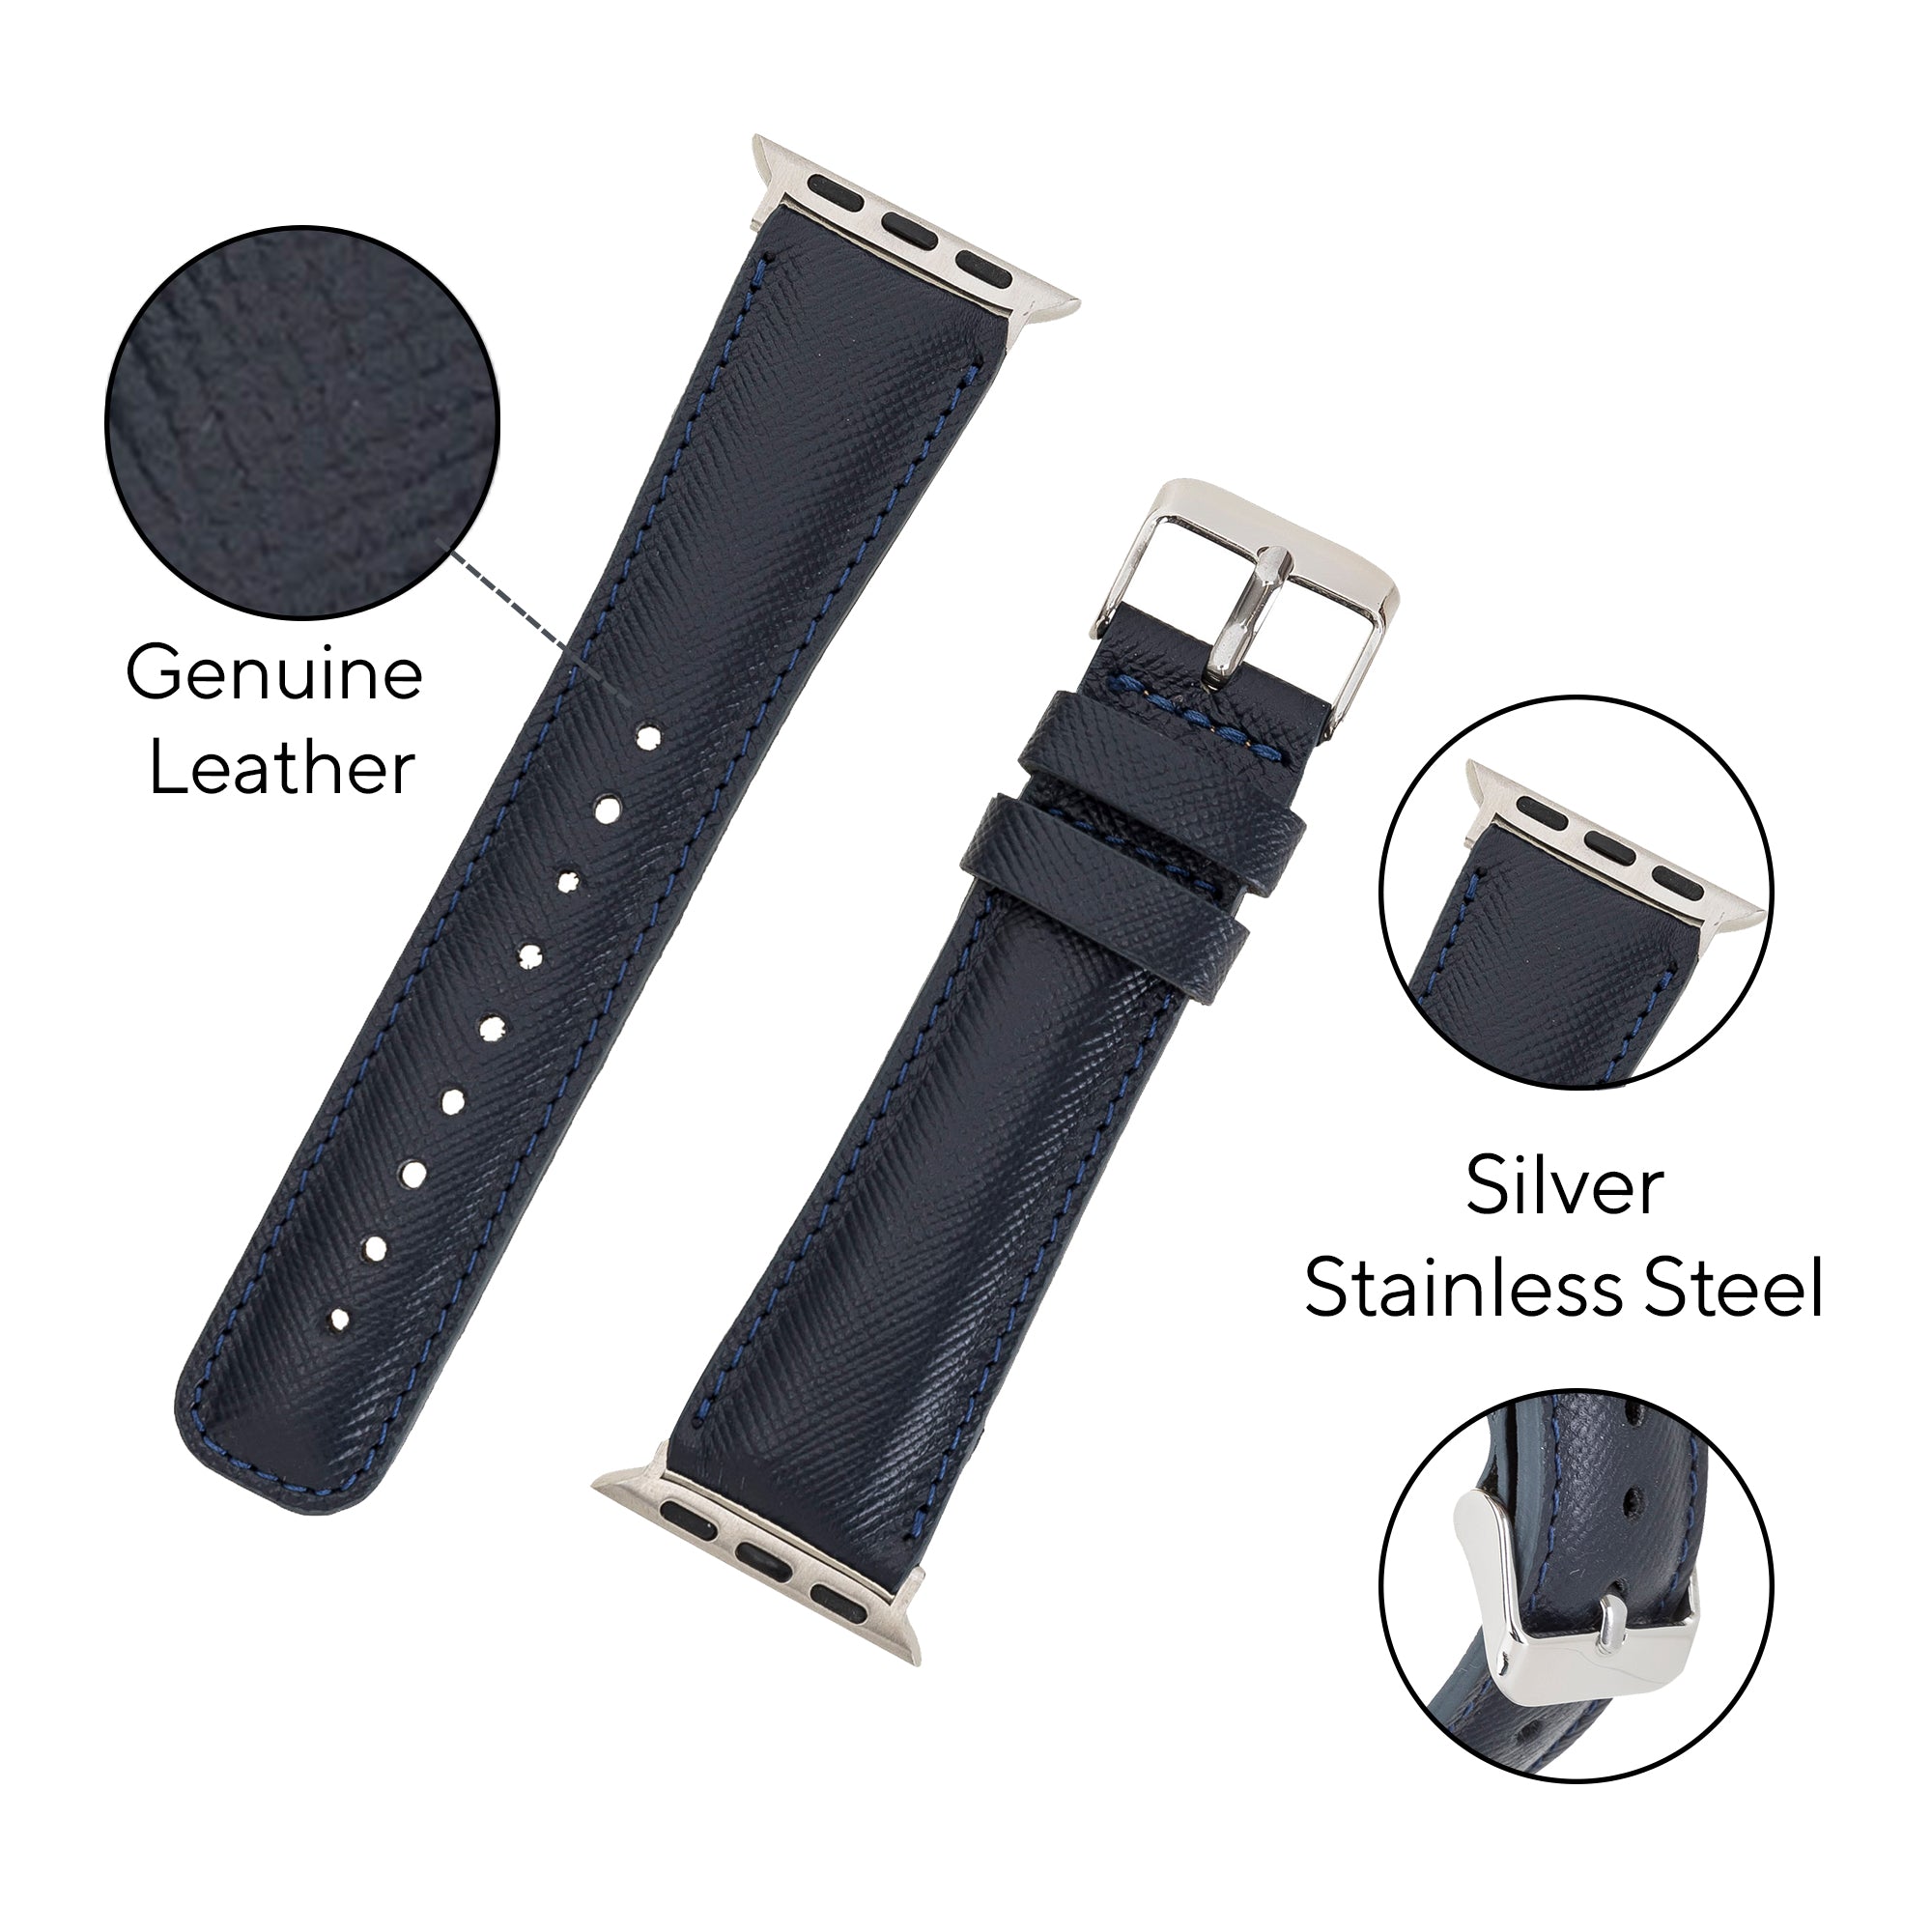  DelfiCase Liverpool Collection Leather Watch Band for Apple & Fitbit Versa Watch Band 79